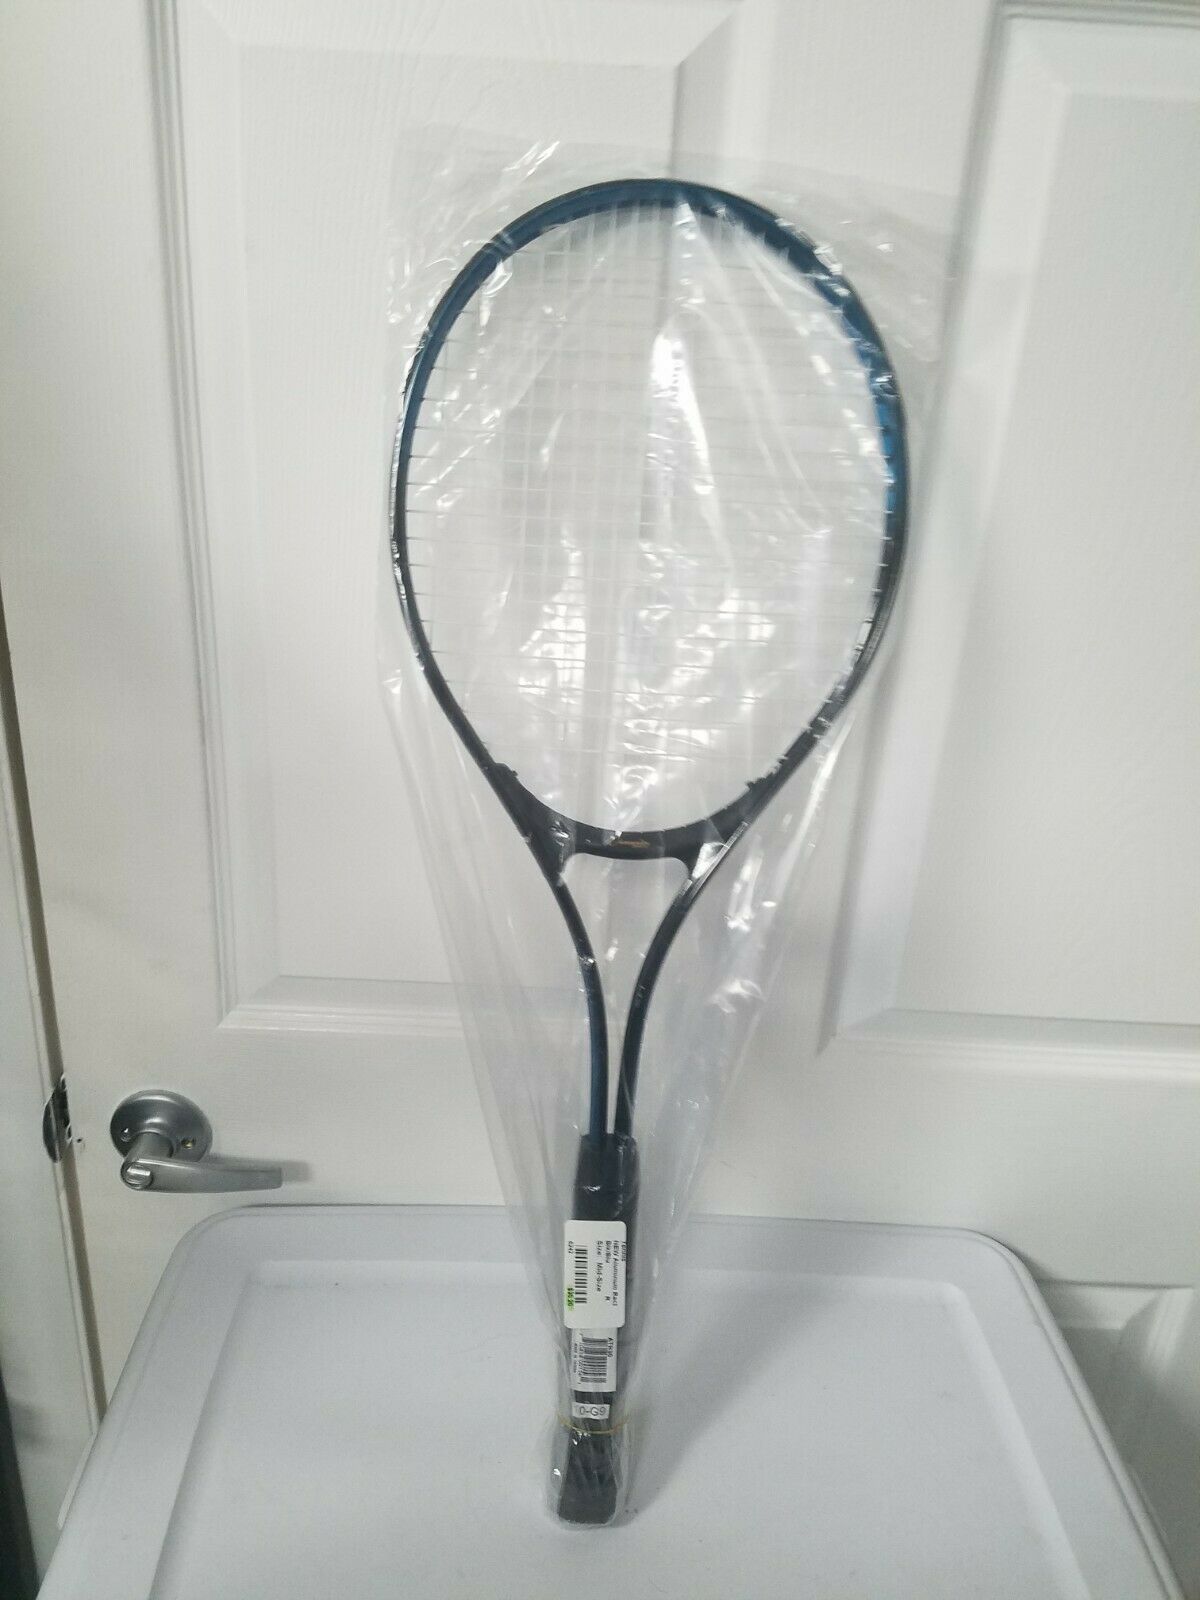 Champion Sports New Aluminum Tennis Racket Size 4 3/8 In Clearance